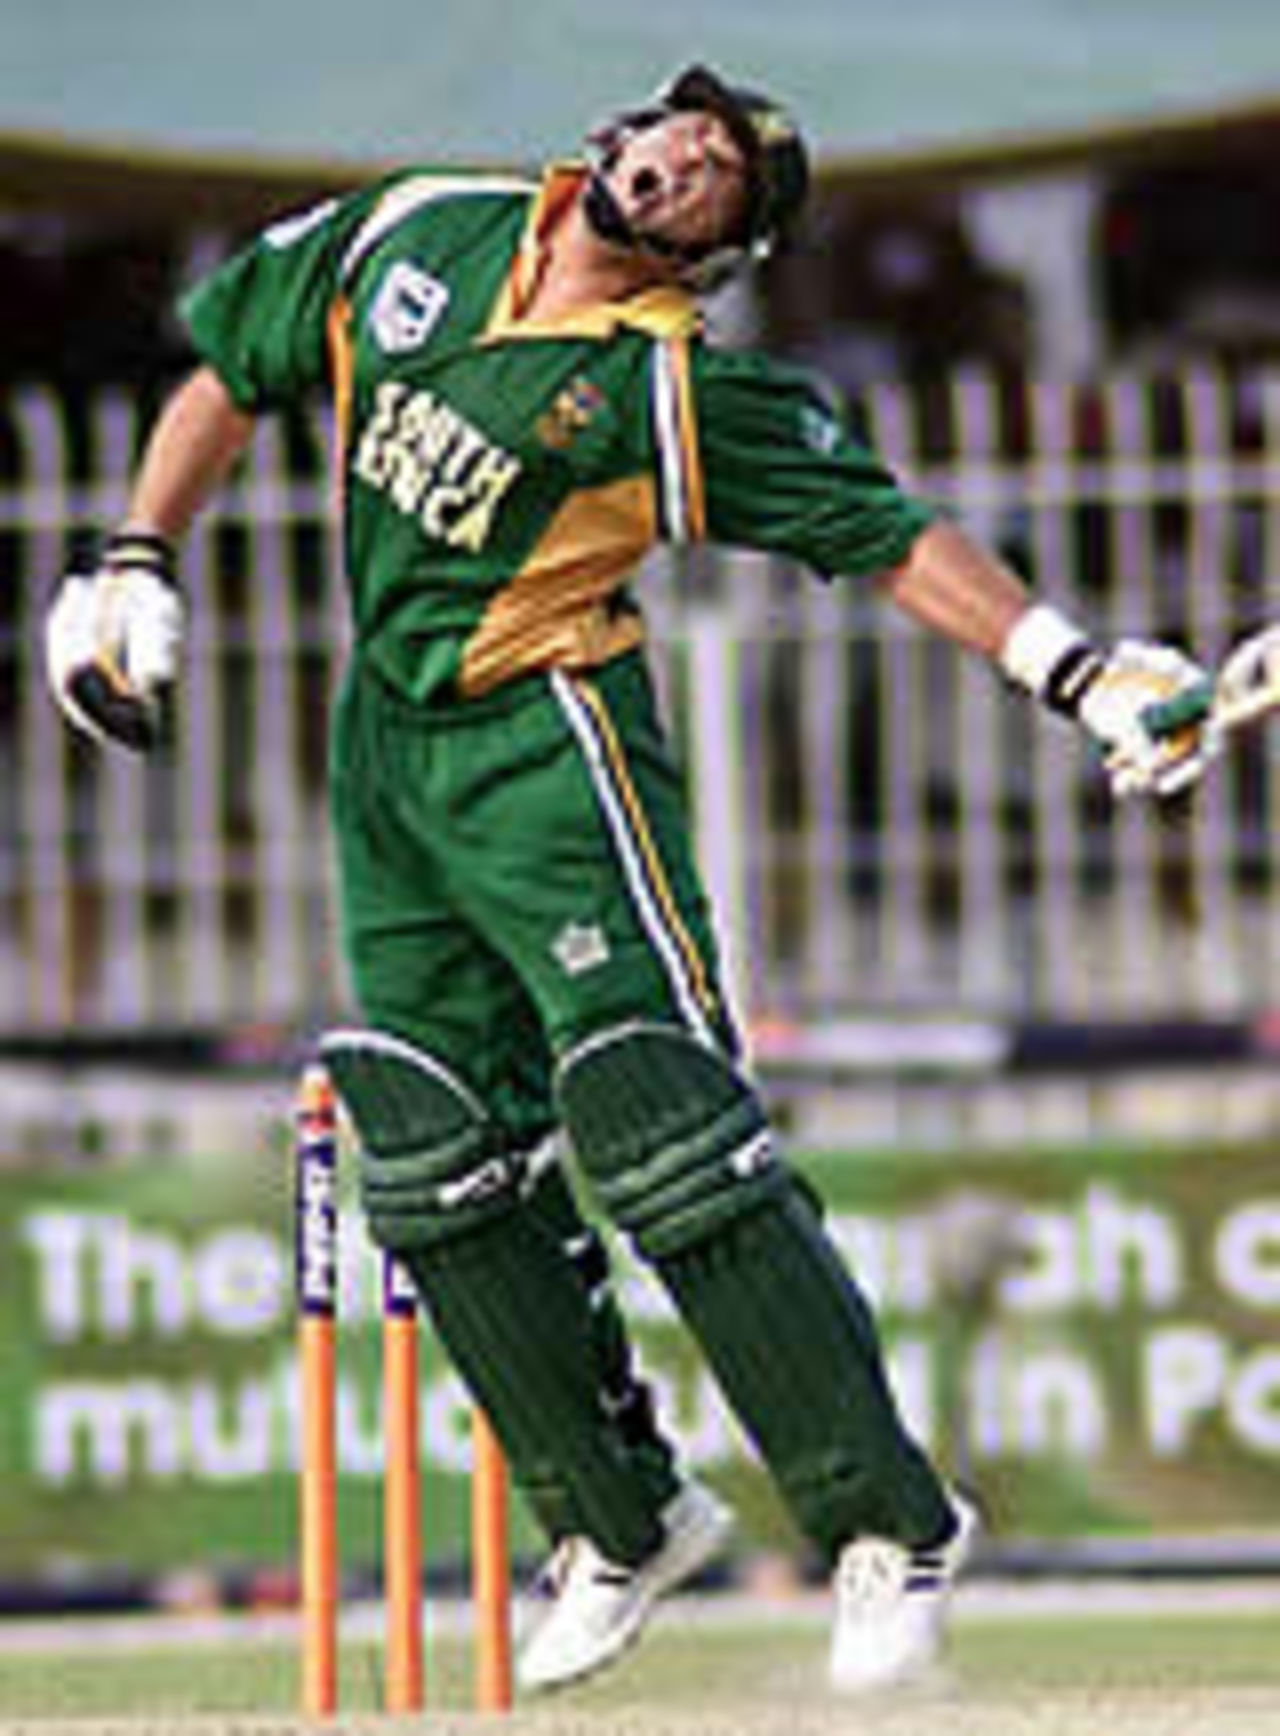 Shoaib Akhtar's beamer causes problems for Jacques Kallis during his 62-run innings, Pakistan v South Africa, 3rd ODI, Faisalabad, October 7, 2003.